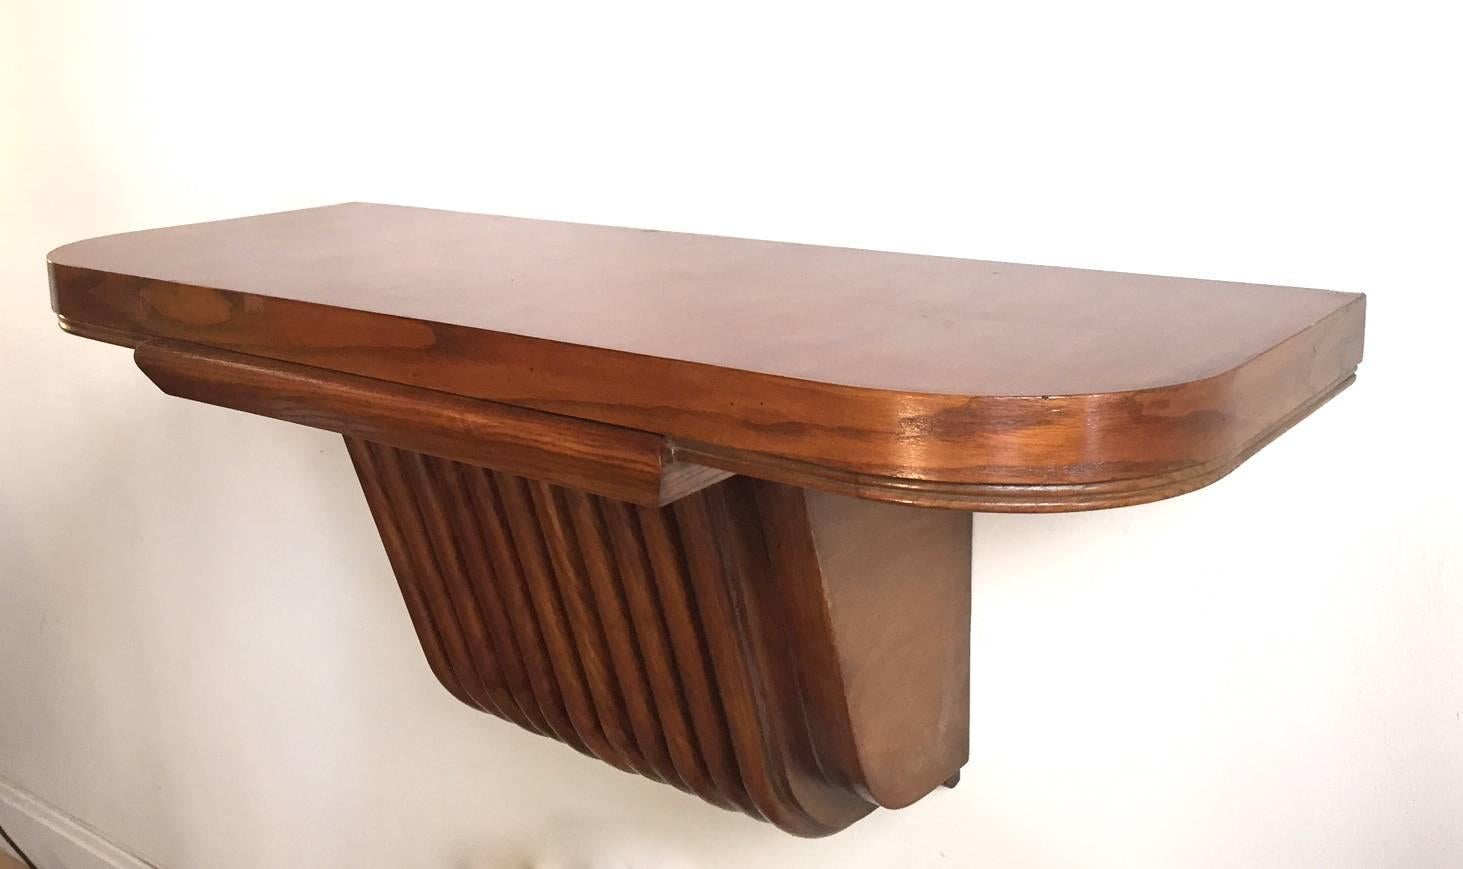 An extremely rare wall-mounted 1950s walnut console designed by Osvaldo Borsani .Excellent condition.
Shipping cost to America: 250 €.
Shipping cost to Europe: 200 €.